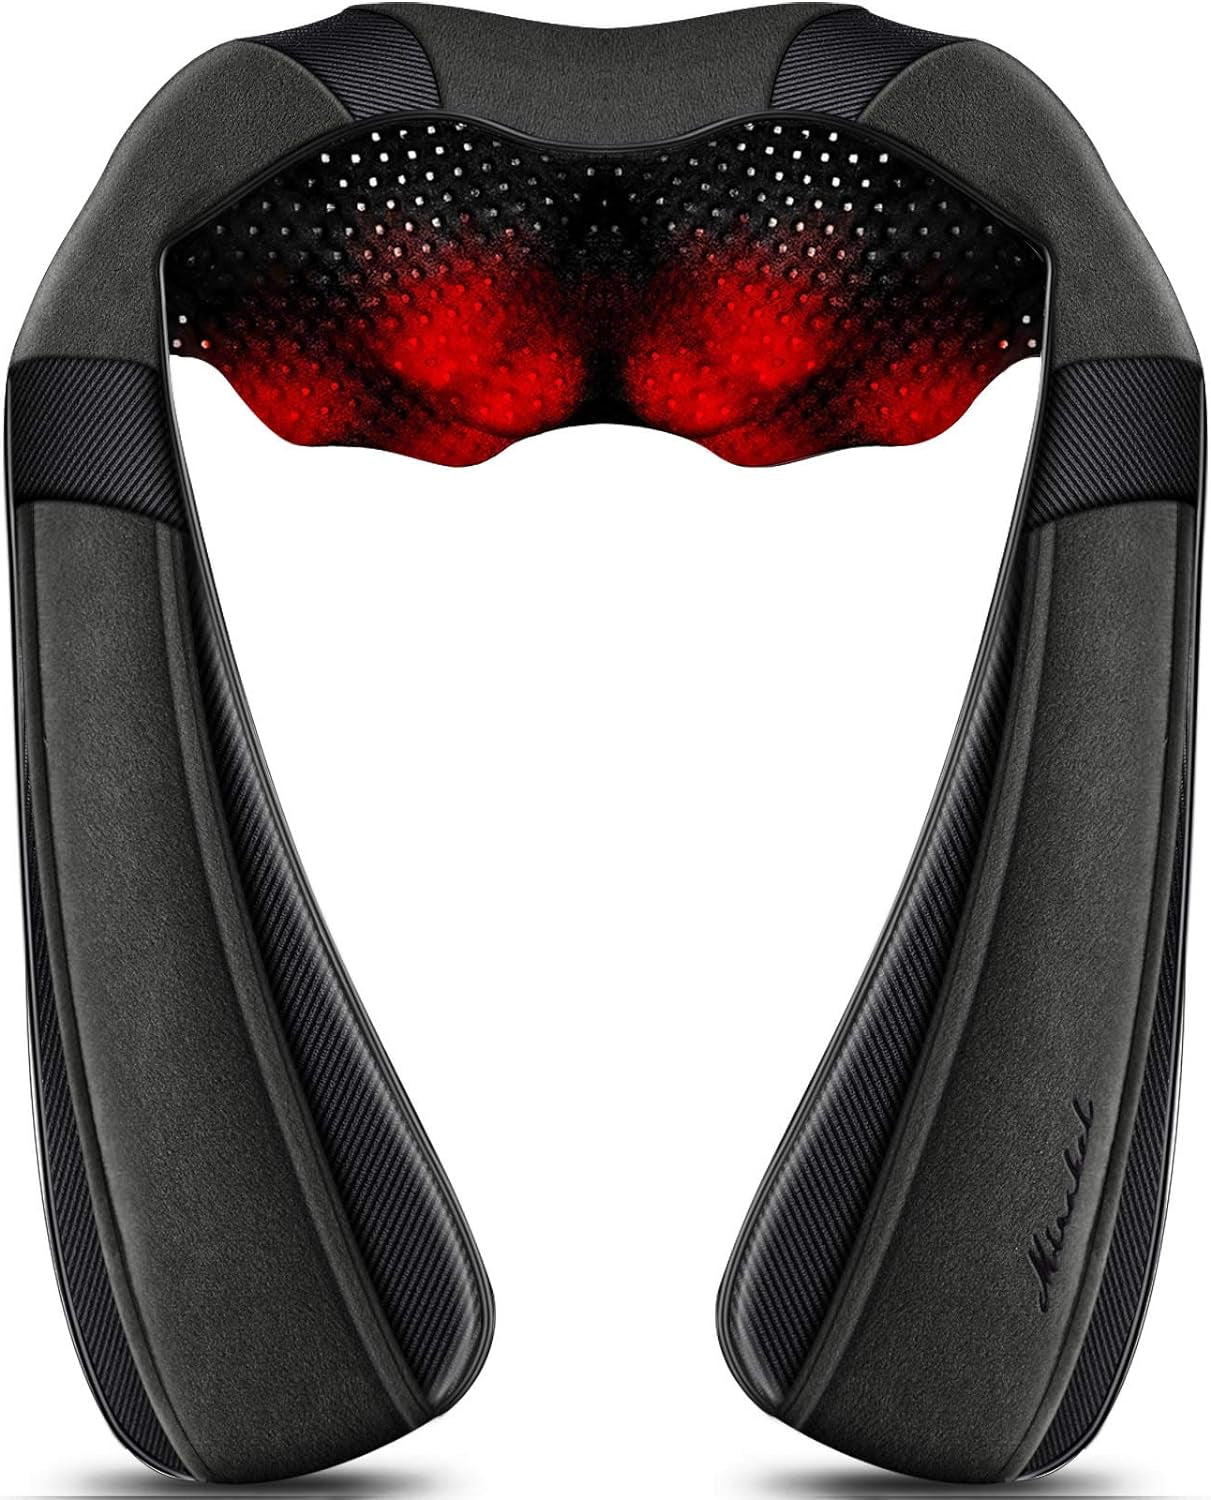 Neck Massager, Back Massager with Heat, Electric Shoulder Massager, Shiatsu Back Neck Massager Relief Back Pain, Neck Pain, Back and Neck Massager Birthday Gifts